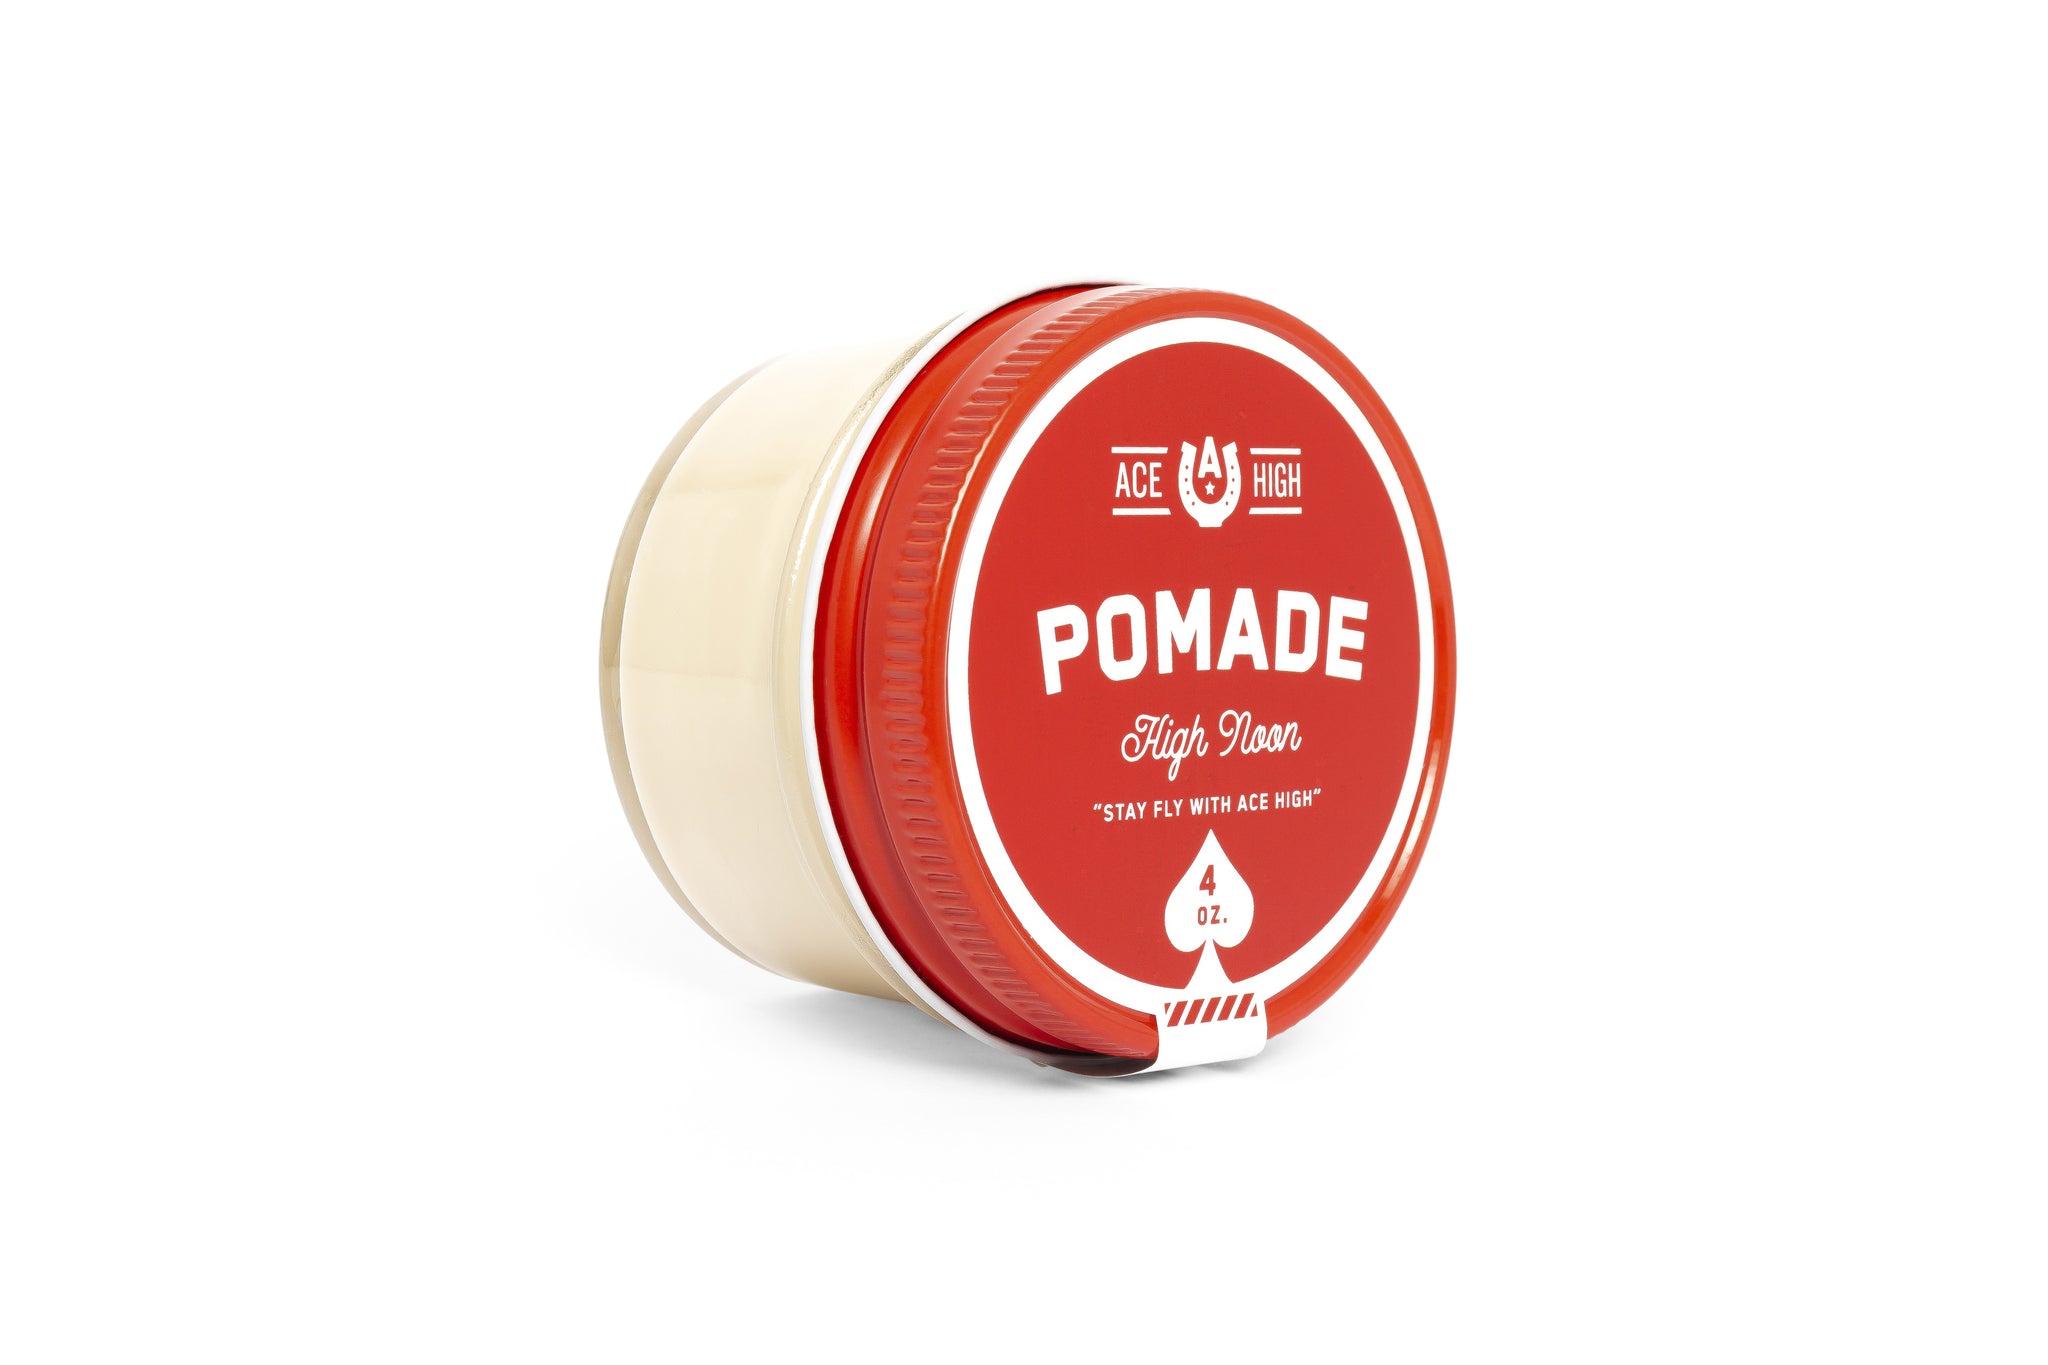 High Noon Pomade